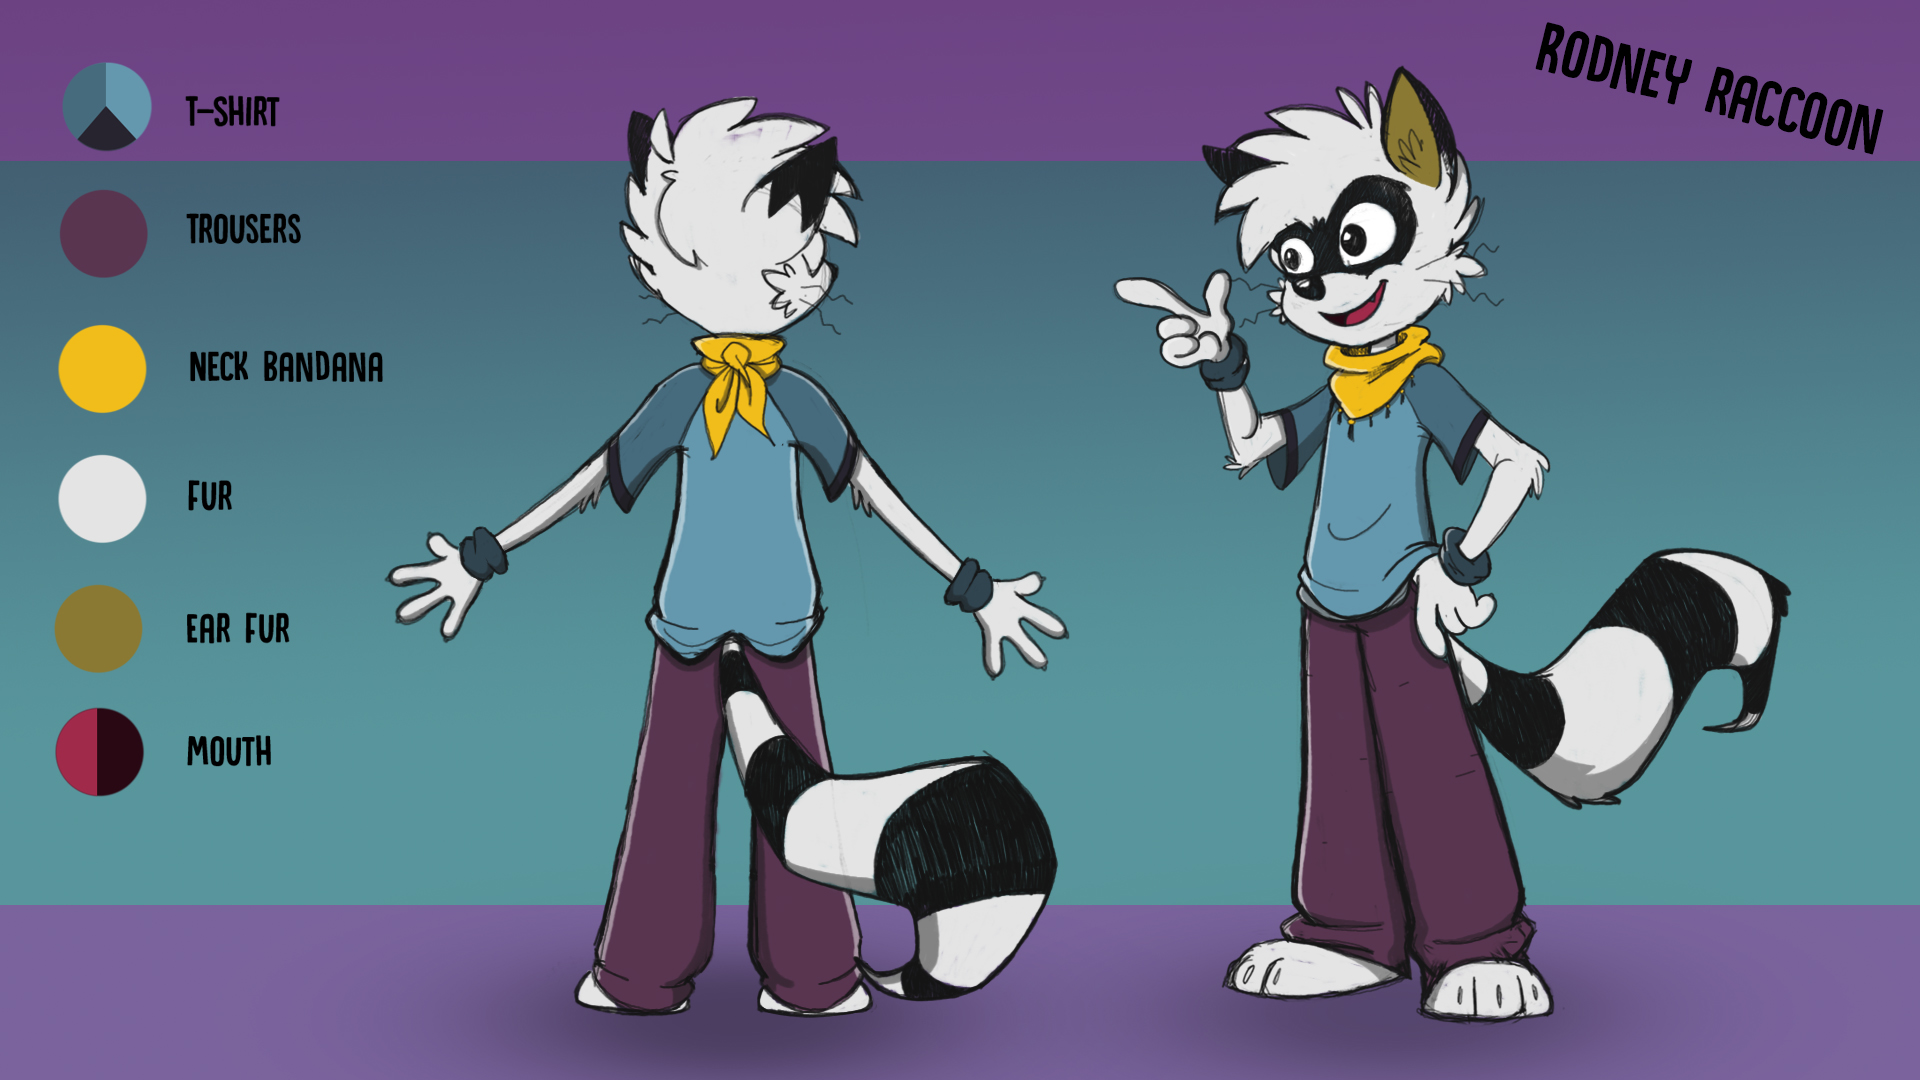 Rodney Raccoon character reference sheet by StudioFezz on DeviantArt